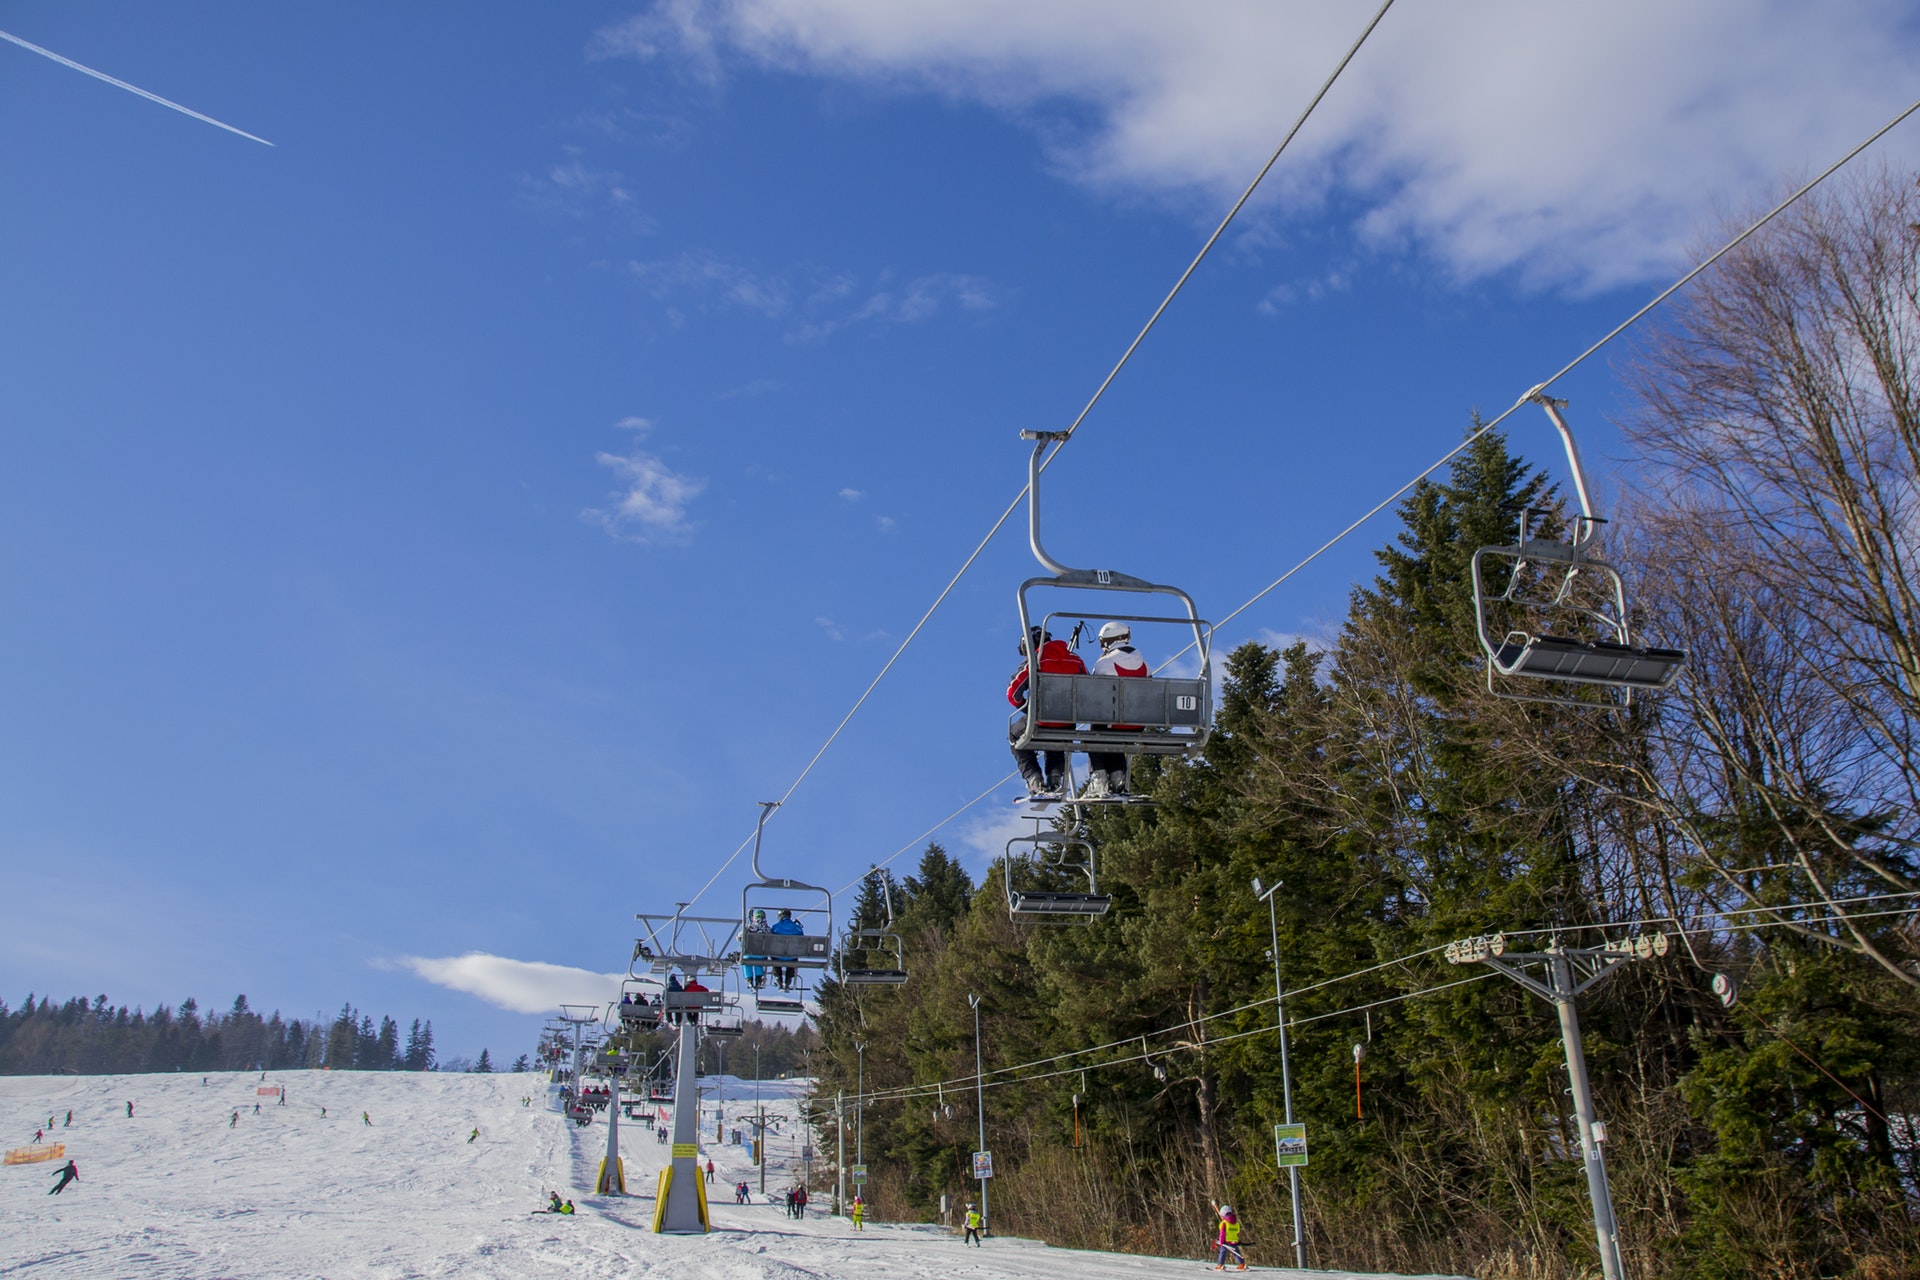 a ski lift with people on it